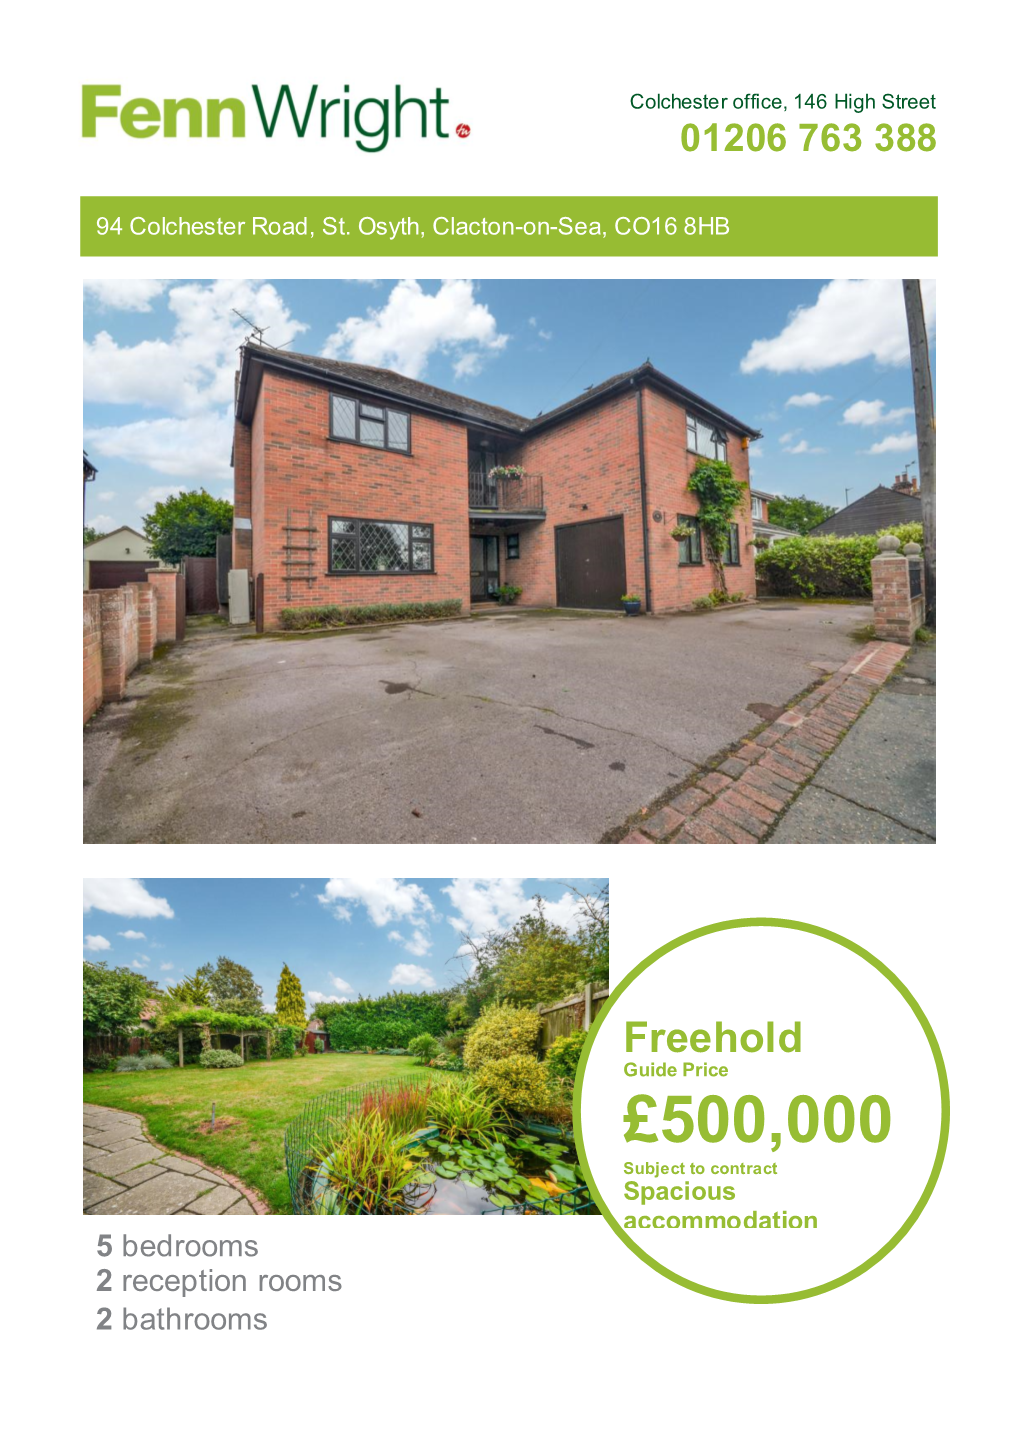 £500,000 Subject to Contract Spacious Accommodation 5 Bedrooms 2 Reception Rooms 2 Bathrooms